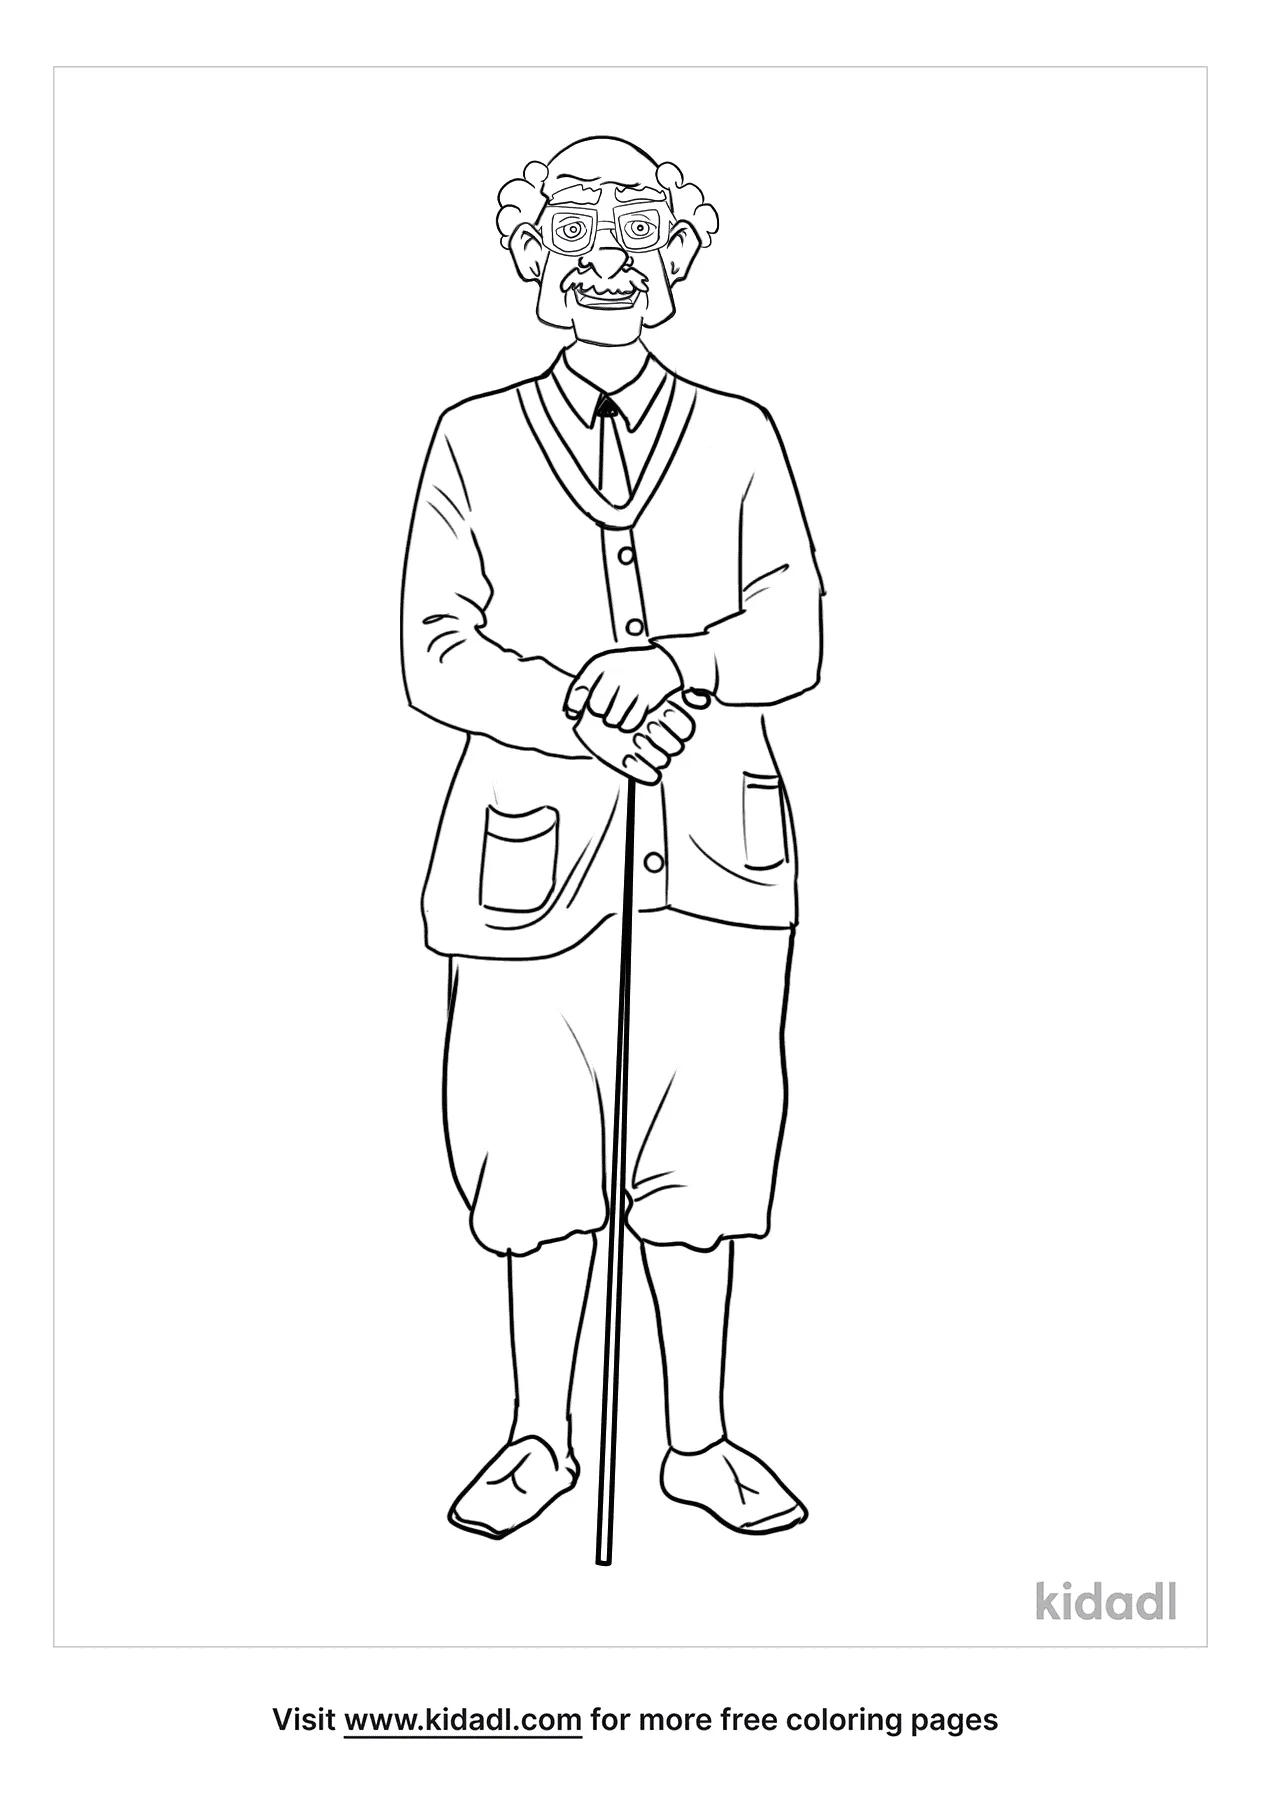 Old Man In Golf Knickers Coloring Page